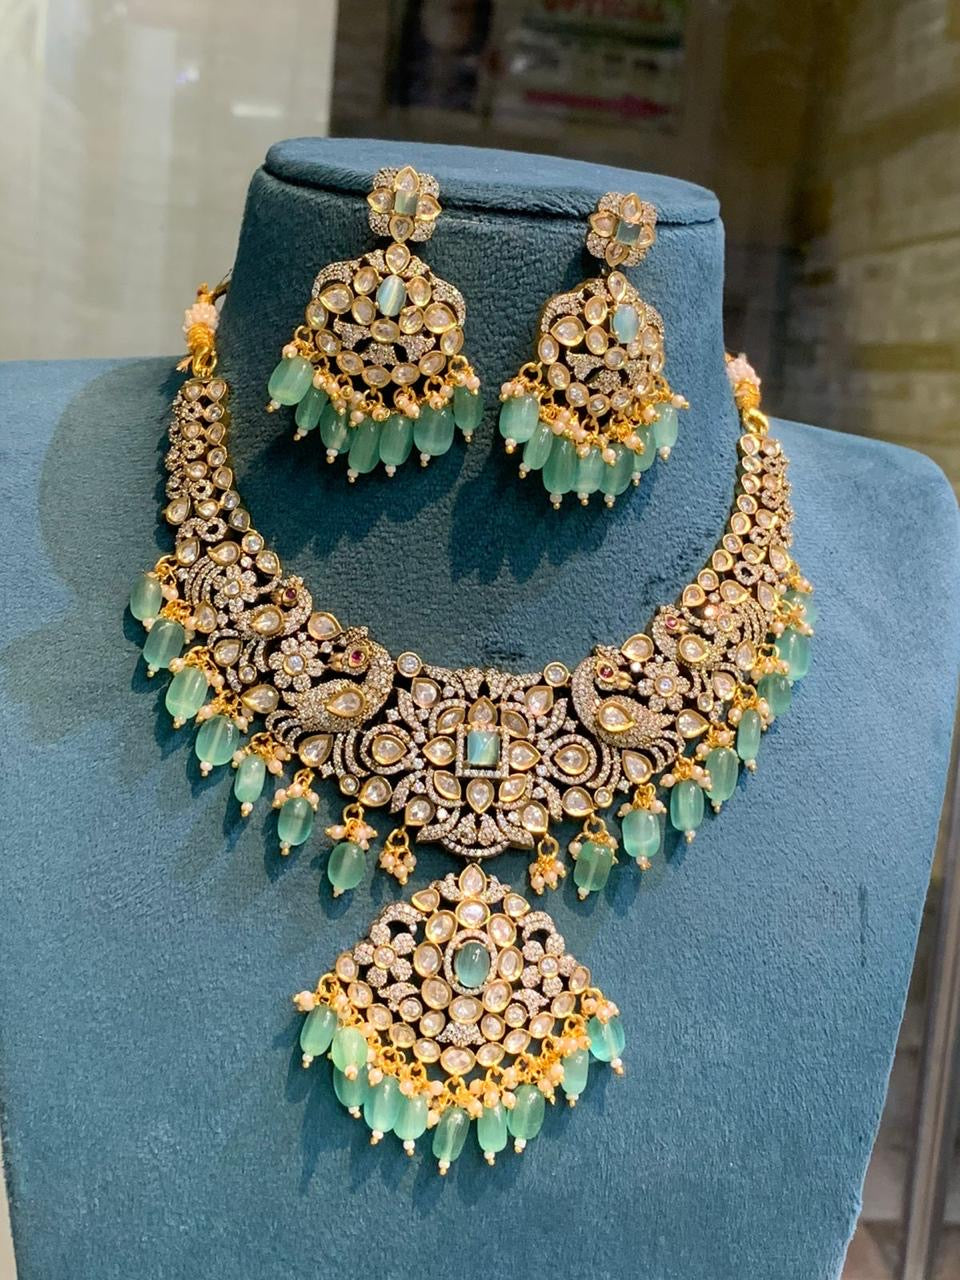 Bridal Victorian Opulence: Elegant Cz Stone Peacock Necklace with Earrings